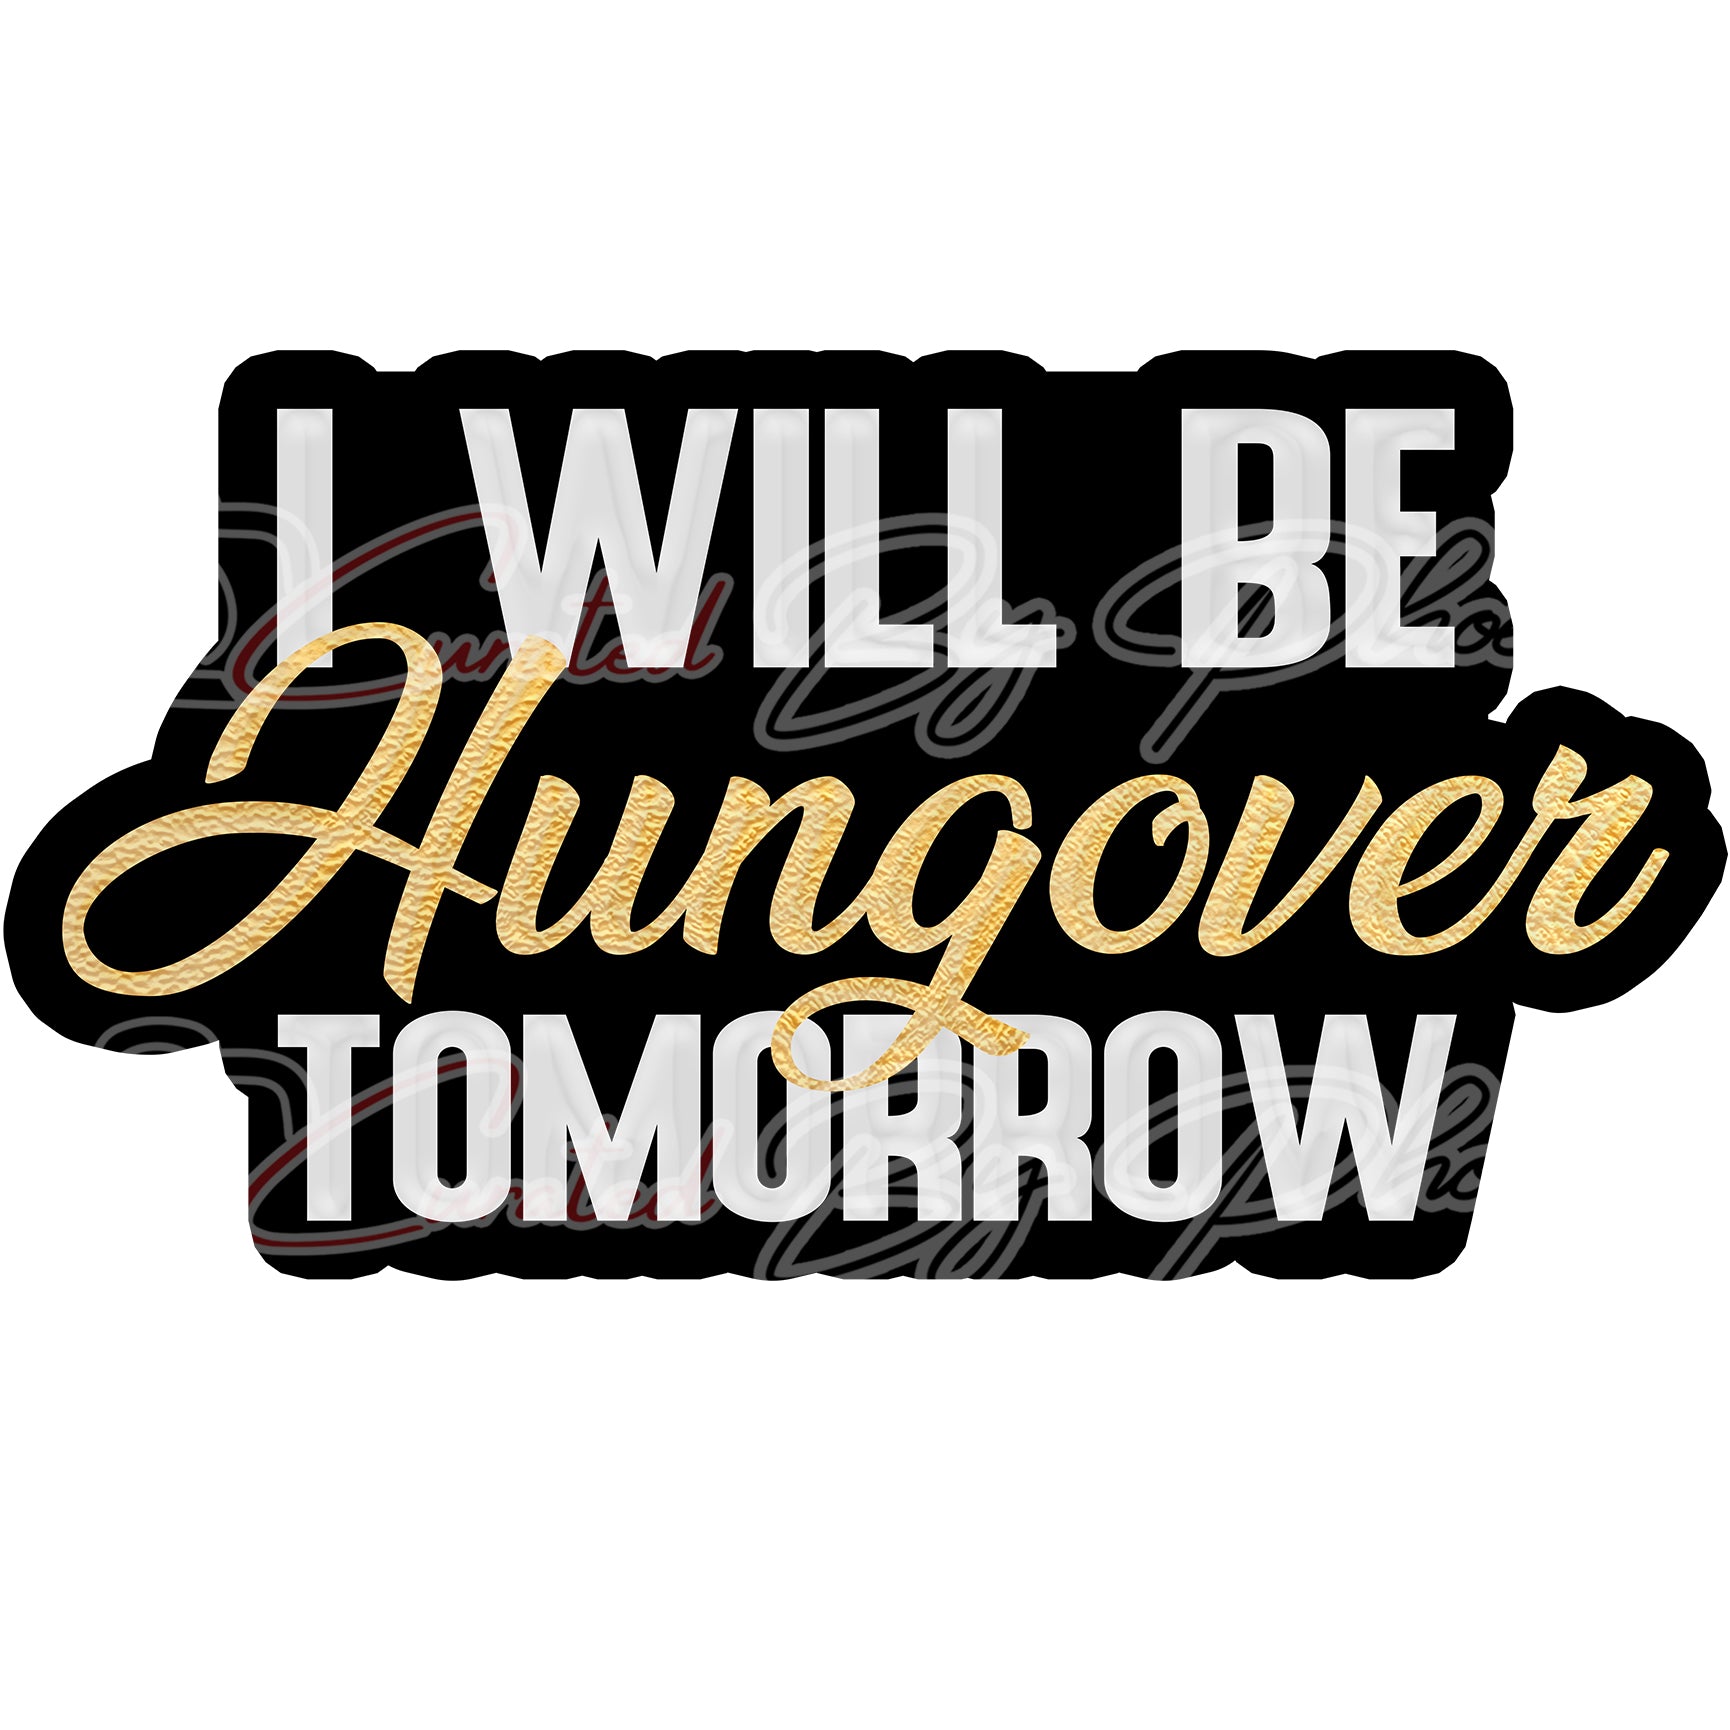 I Will Be Hungover Tomorrow Prop - I Will Be Hungover Tomorrow Photo booth prop sign - Photo booth props-custom props -prop signs-props-Curated by Phoenix